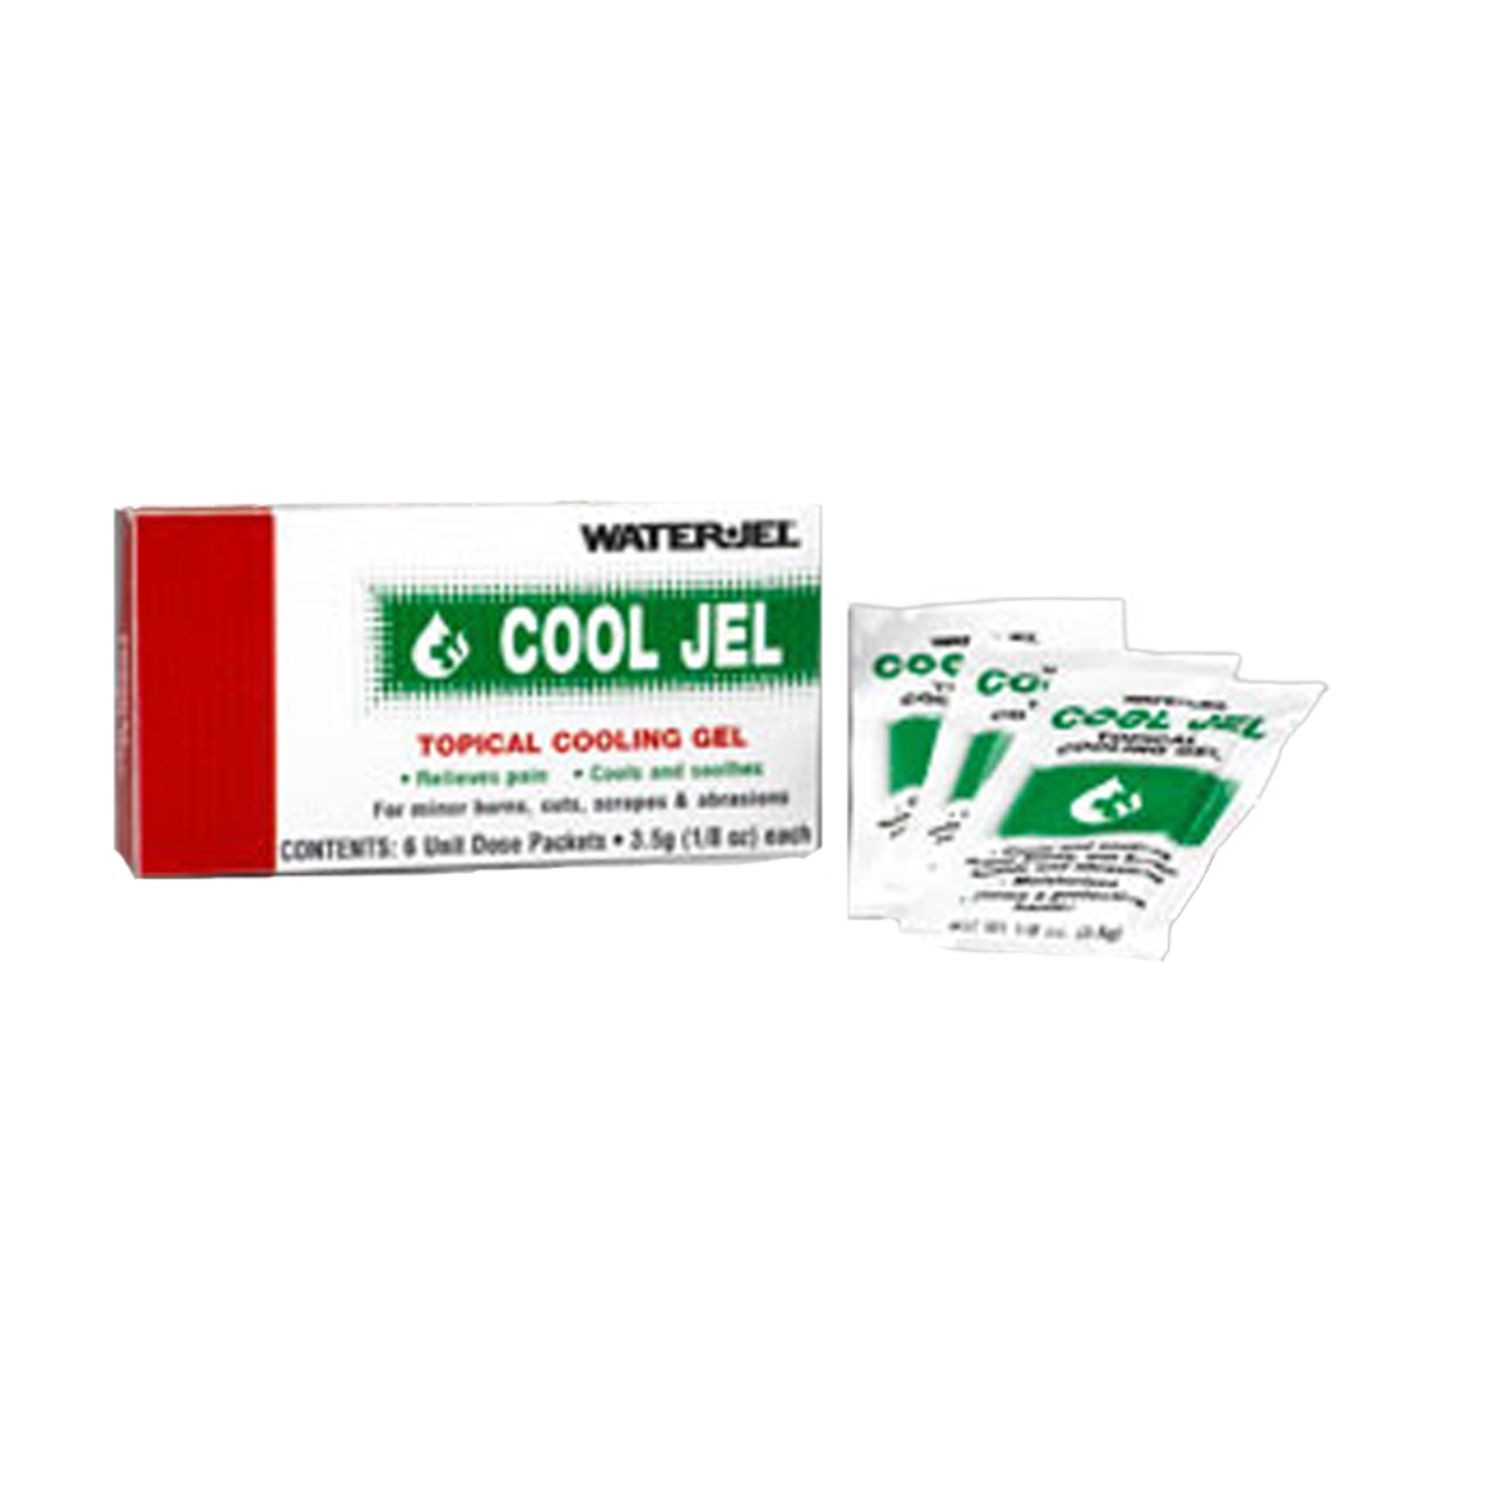 Cool Jel 1/8oz packet (Box of 6)